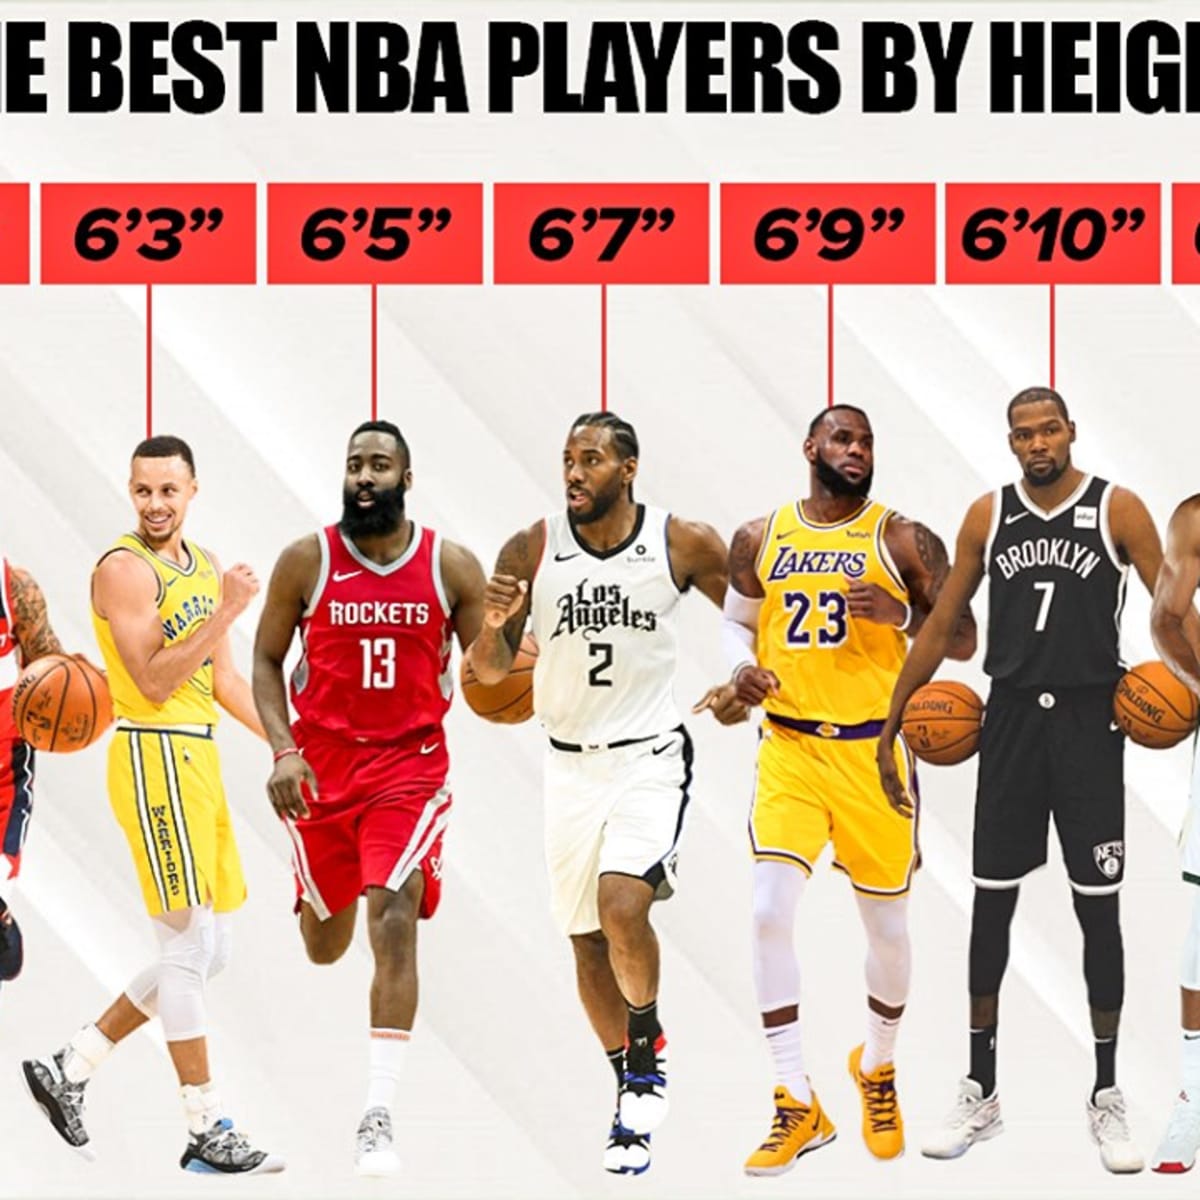 Who are the tallest NBA players? Full list with height, team